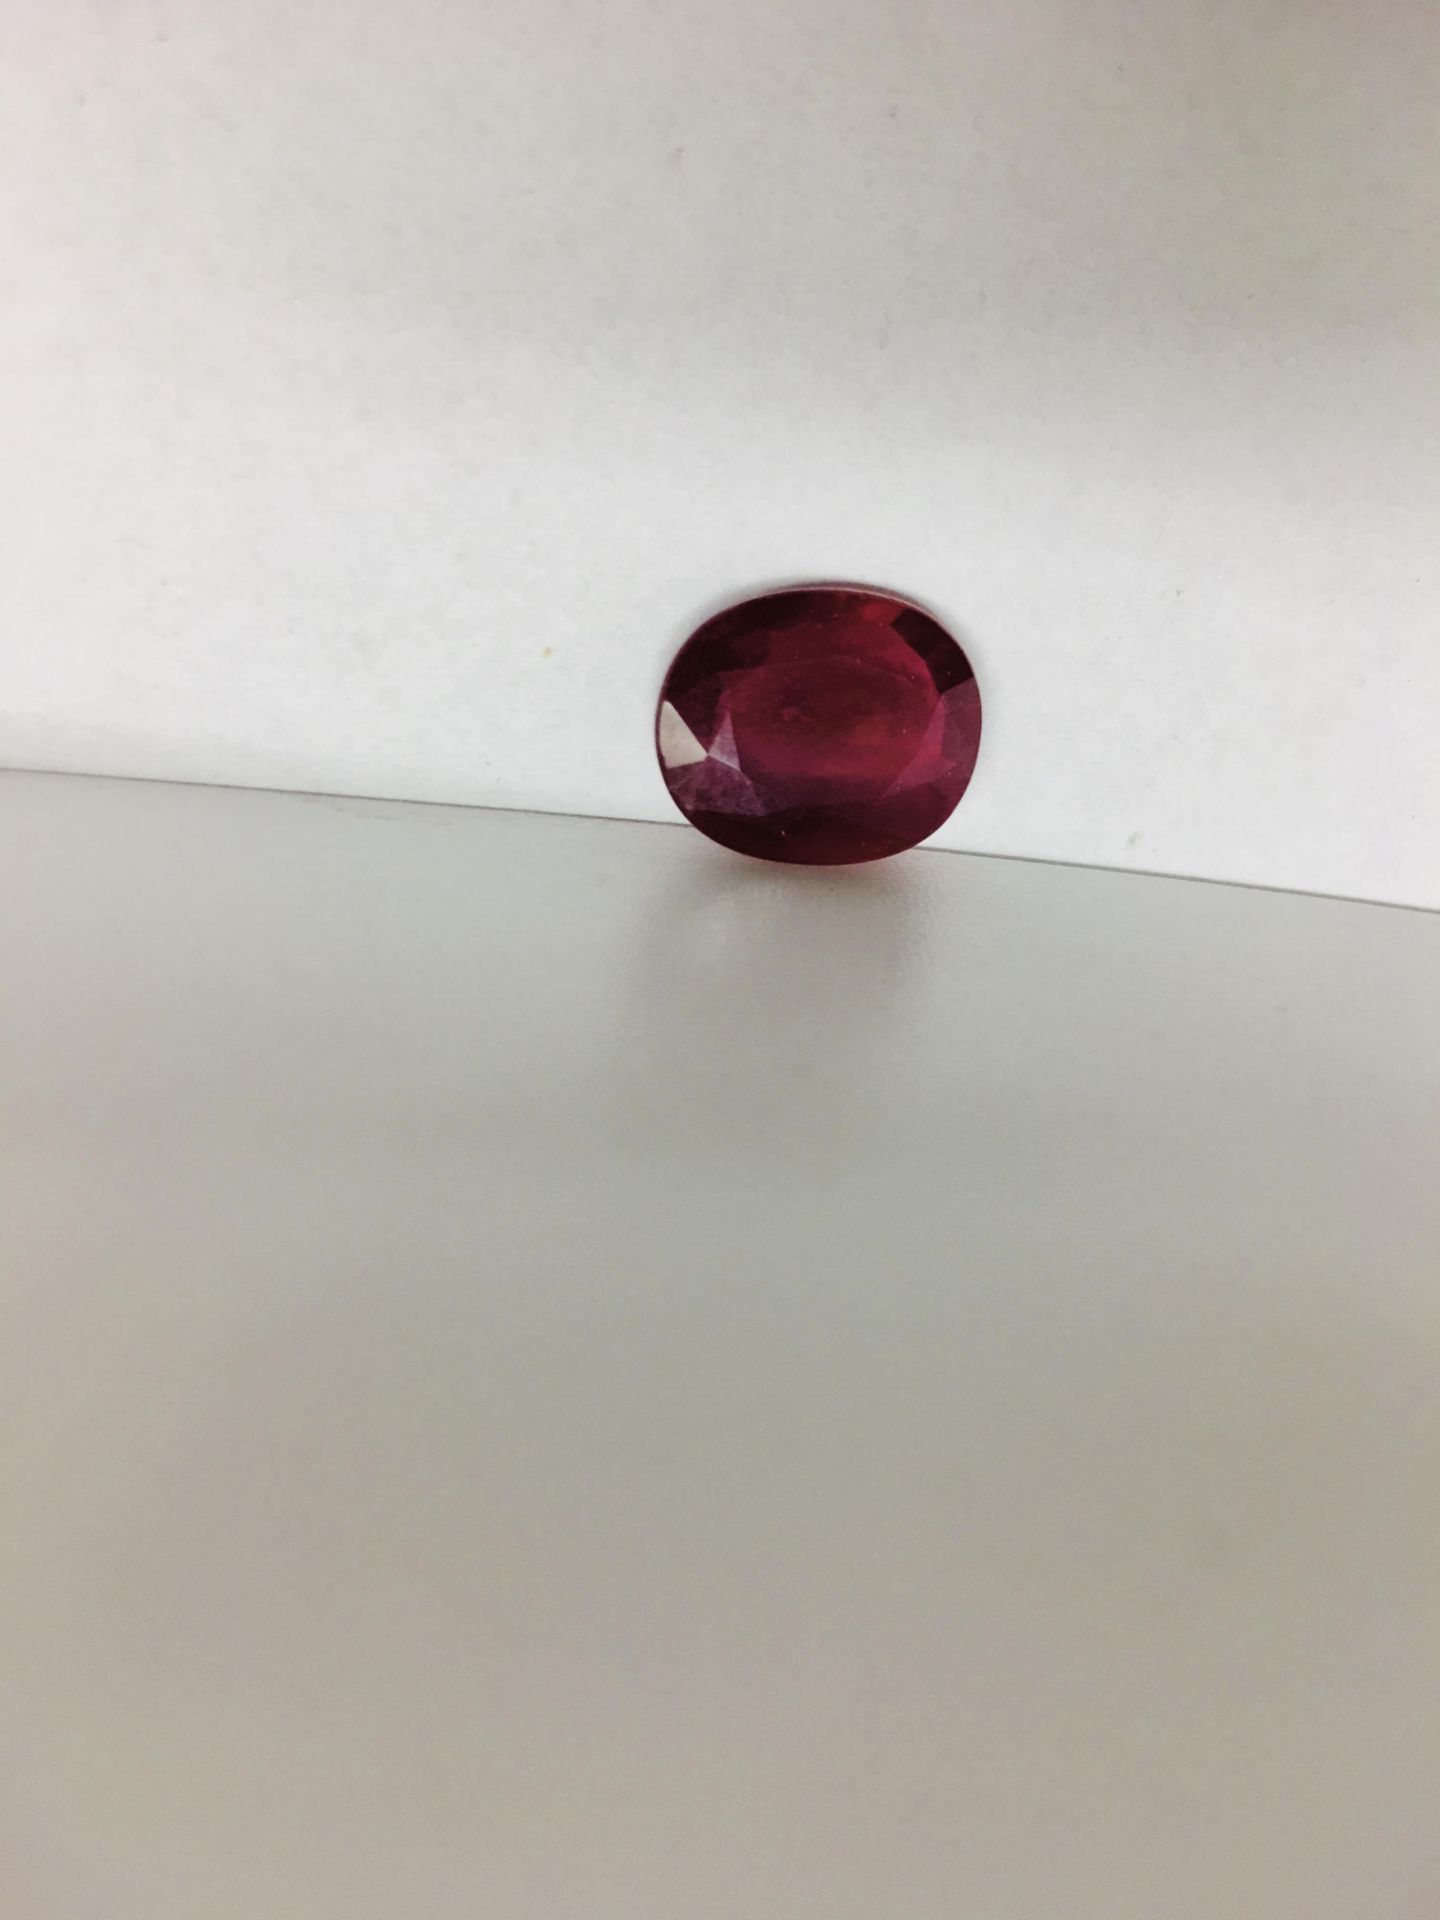 4.41ct ruby,Enhanced by Frature,good clarity and colour,12mmx10mm ,valued at 800 - Image 2 of 4